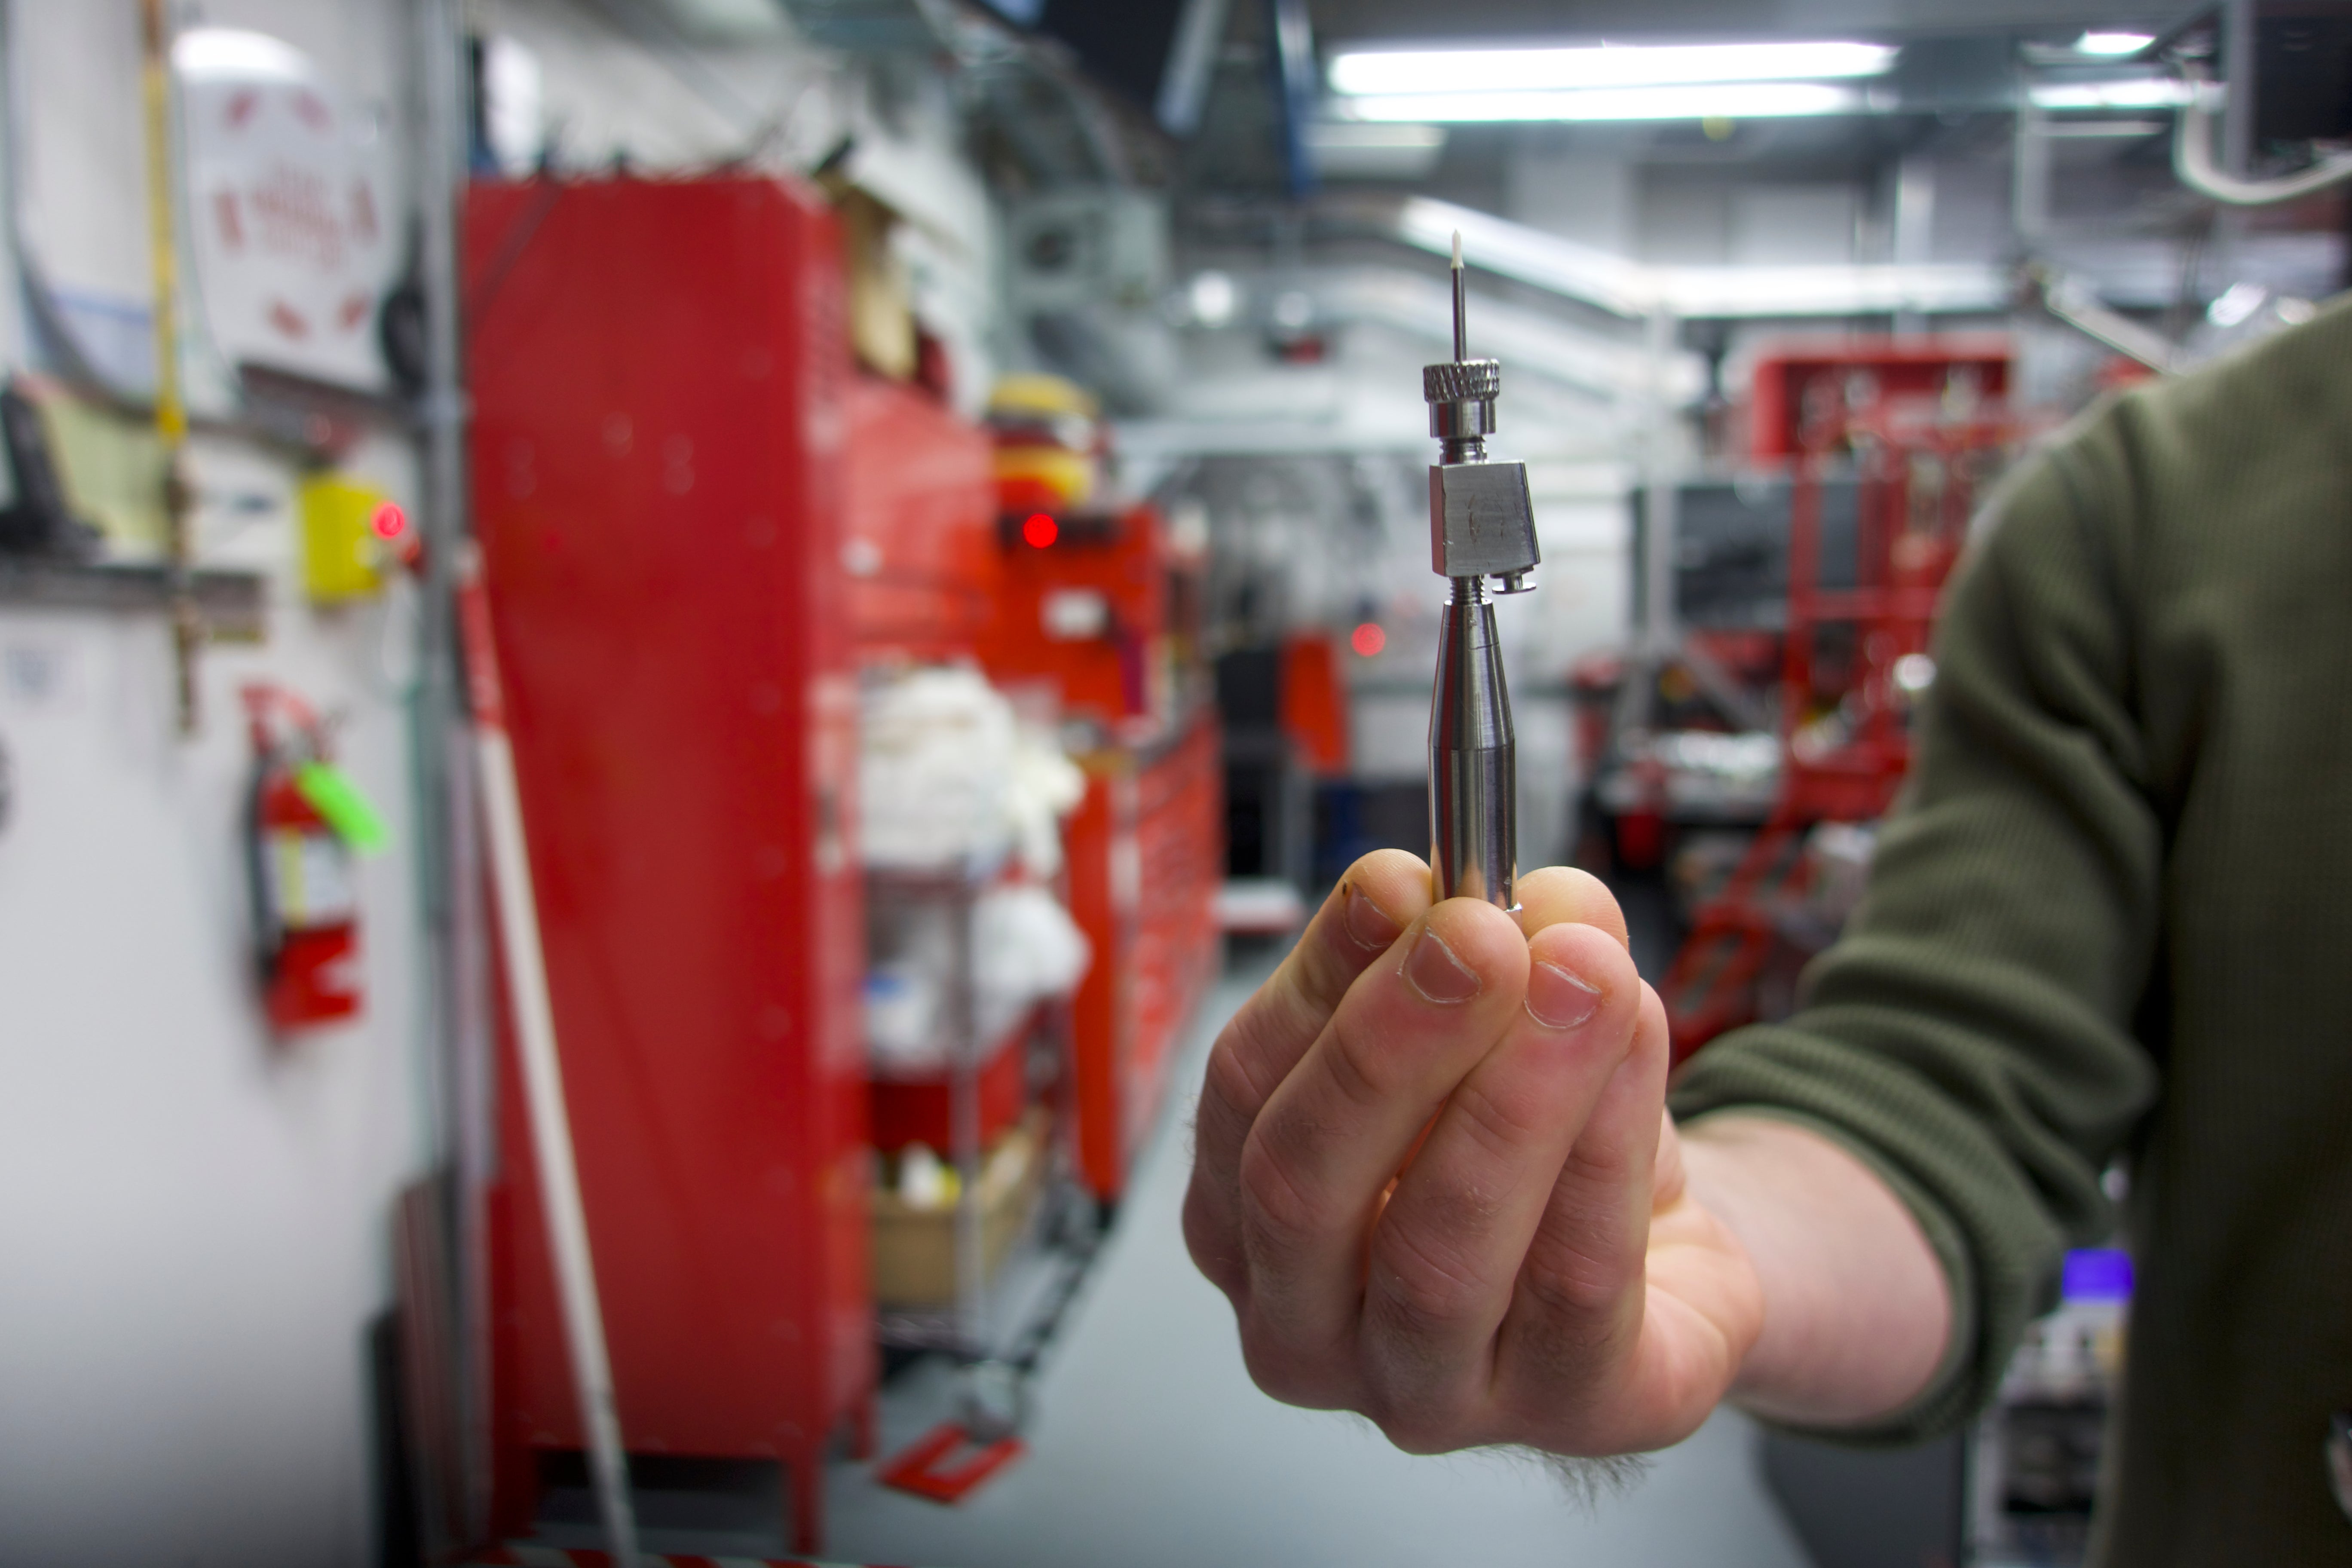 A researcher holds up the needle that injected their sample into a laser beam. (Photo: Isaac Schultz)